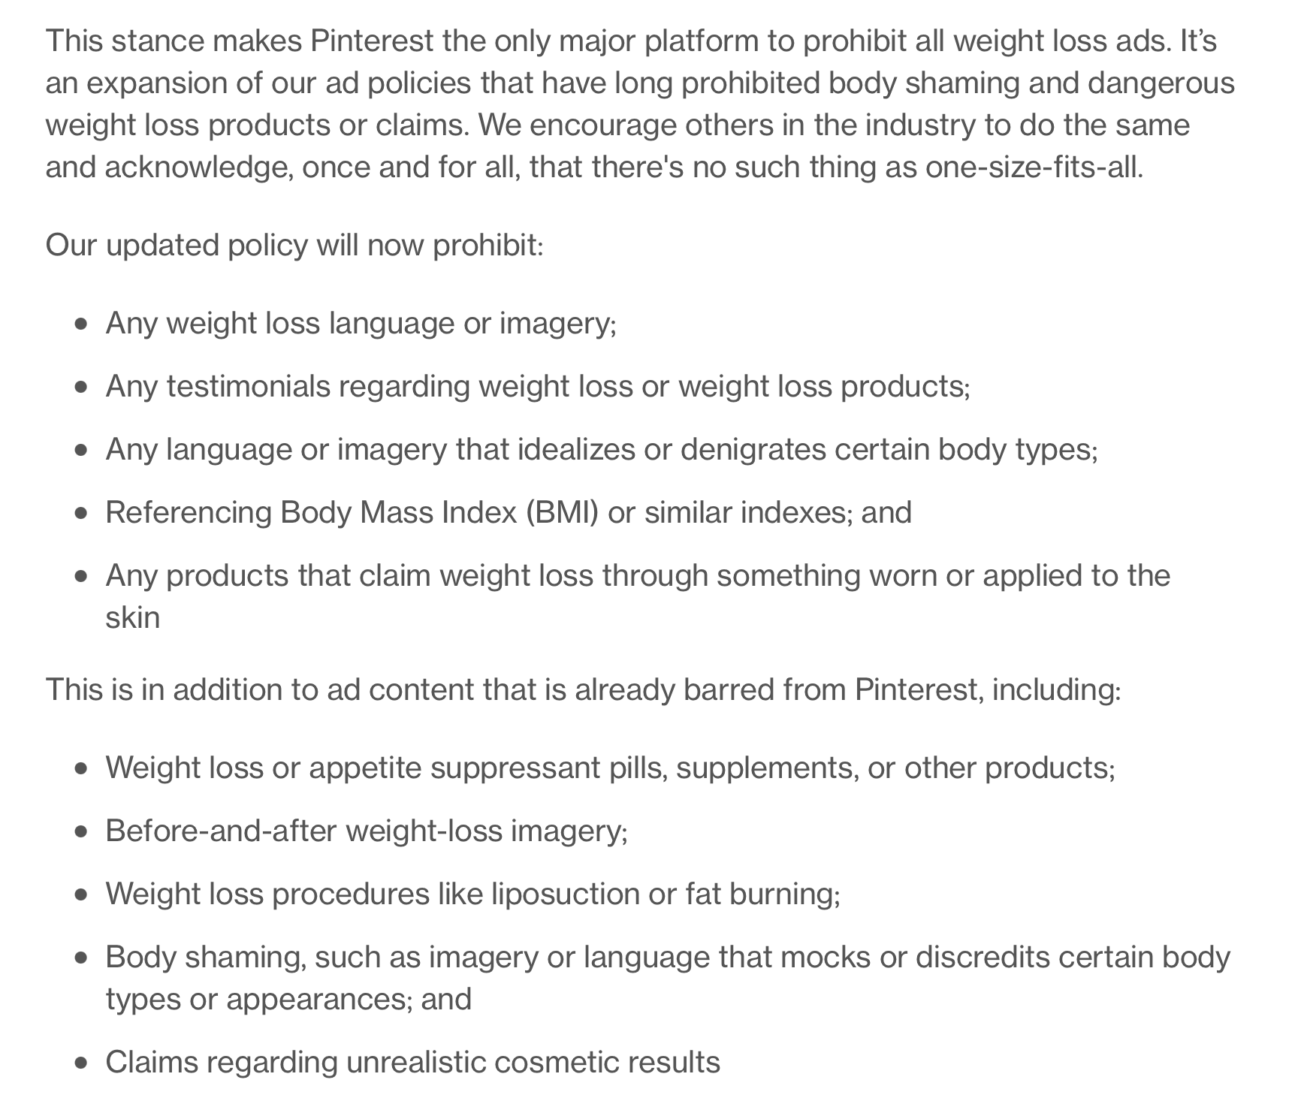 This stance makes Pinterest the only major platform to prohibit all weight loss ads. It’s an expansion of our ad policies that have long prohibited body shaming and dangerous weight loss products or claims. We encourage others in the industry to do the same and acknowledge, once and for all, that there's no such thing as one-size-fits-all.   Our updated policy will now prohibit:   Any weight loss language or imagery;  Any testimonials regarding weight loss or weight loss products;  Any language or imagery that idealizes or denigrates certain body types;  Referencing Body Mass Index (BMI) or similar indexes; and  Any products that claim weight loss through something worn or applied to the skin  This is in addition to ad content that is already barred from Pinterest, including:   Weight loss or appetite suppressant pills, supplements, or other products;  Before-and-after weight-loss imagery;  Weight loss procedures like liposuction or fat burning;  Body shaming, such as imagery or language that mocks or discredits certain body types or appearances; and  Claims regarding unrealistic cosmetic results 